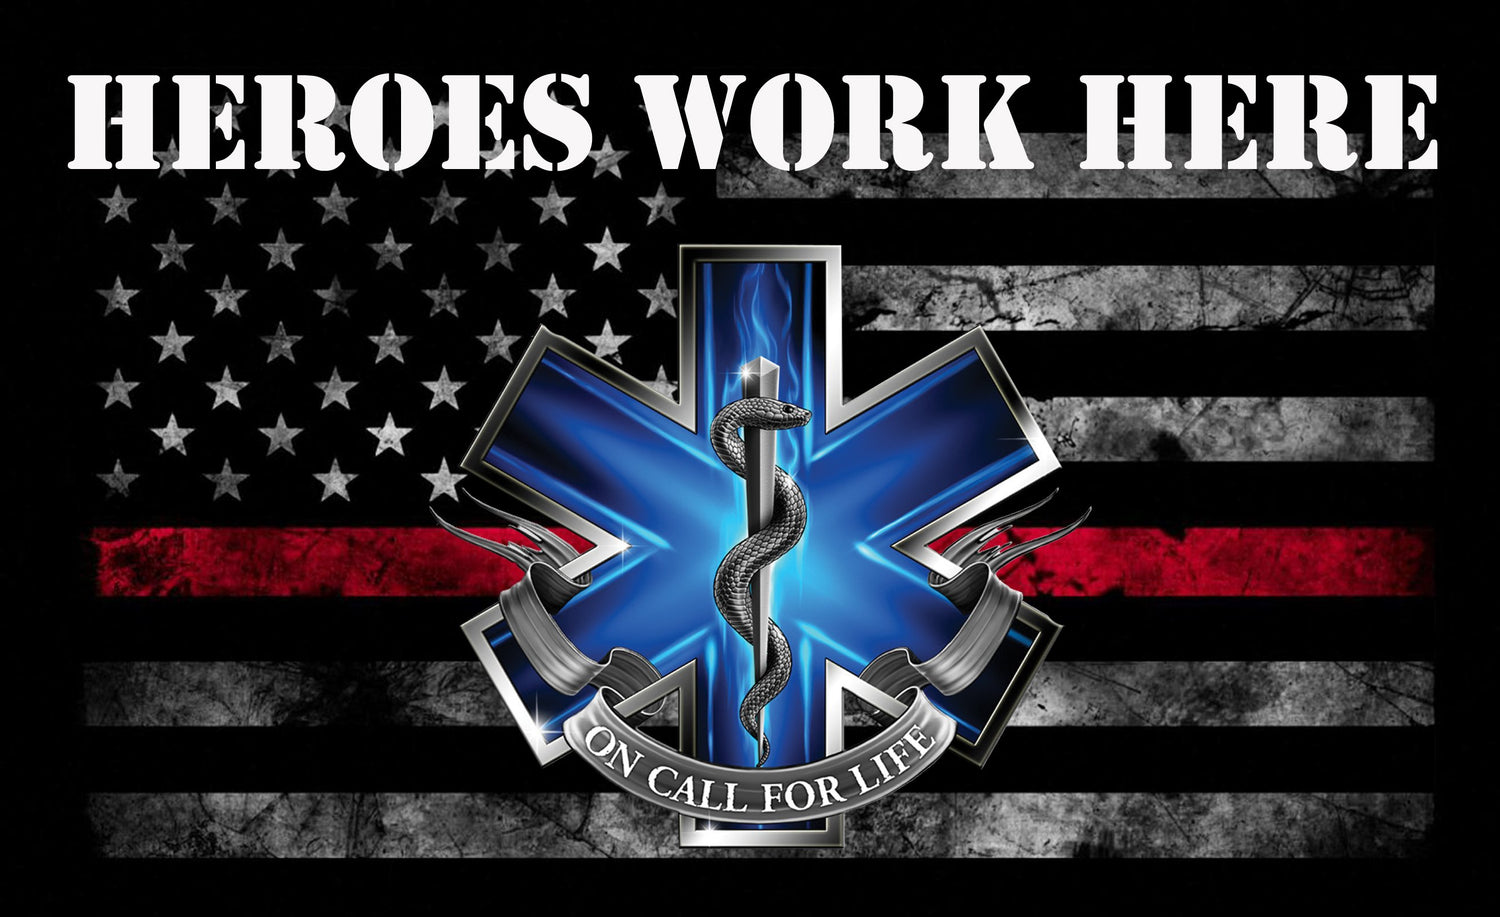 First Responders Heroes Work Here Decal - American flag stickers, automotive decals, automotive stickers, bumper stickers, decals, emt decals, emt stickers, firefighter stickers, firefighters decals, first responders decals, First Responders Heroes Work Here American Flag Decal, First responders Law Enforcement decals, first responders stickers, Heroes Work Here American Flag Decal, vehicle decals, Vehicle stickers, window decal, window decals, window sticker, window stickers, woo_import_1 | Ame